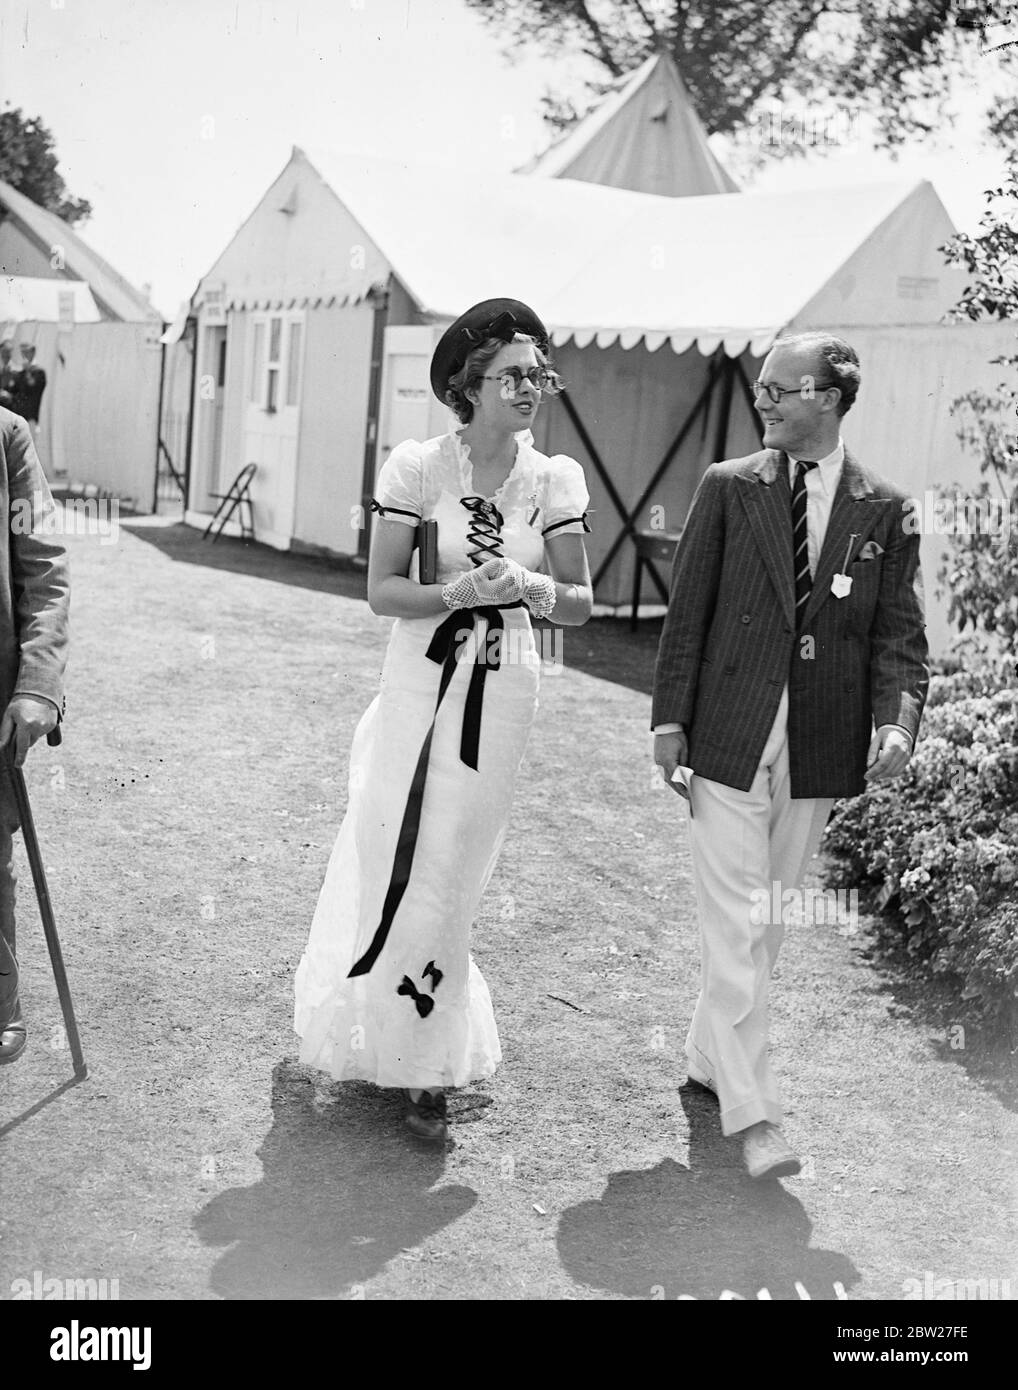 With the heatwave as encouragement, Henley's Royal Regatta vied with Ascot in variety of its fashions. A white fashion relieved by black trimming at Henley. 3 July 1937 Stock Photo